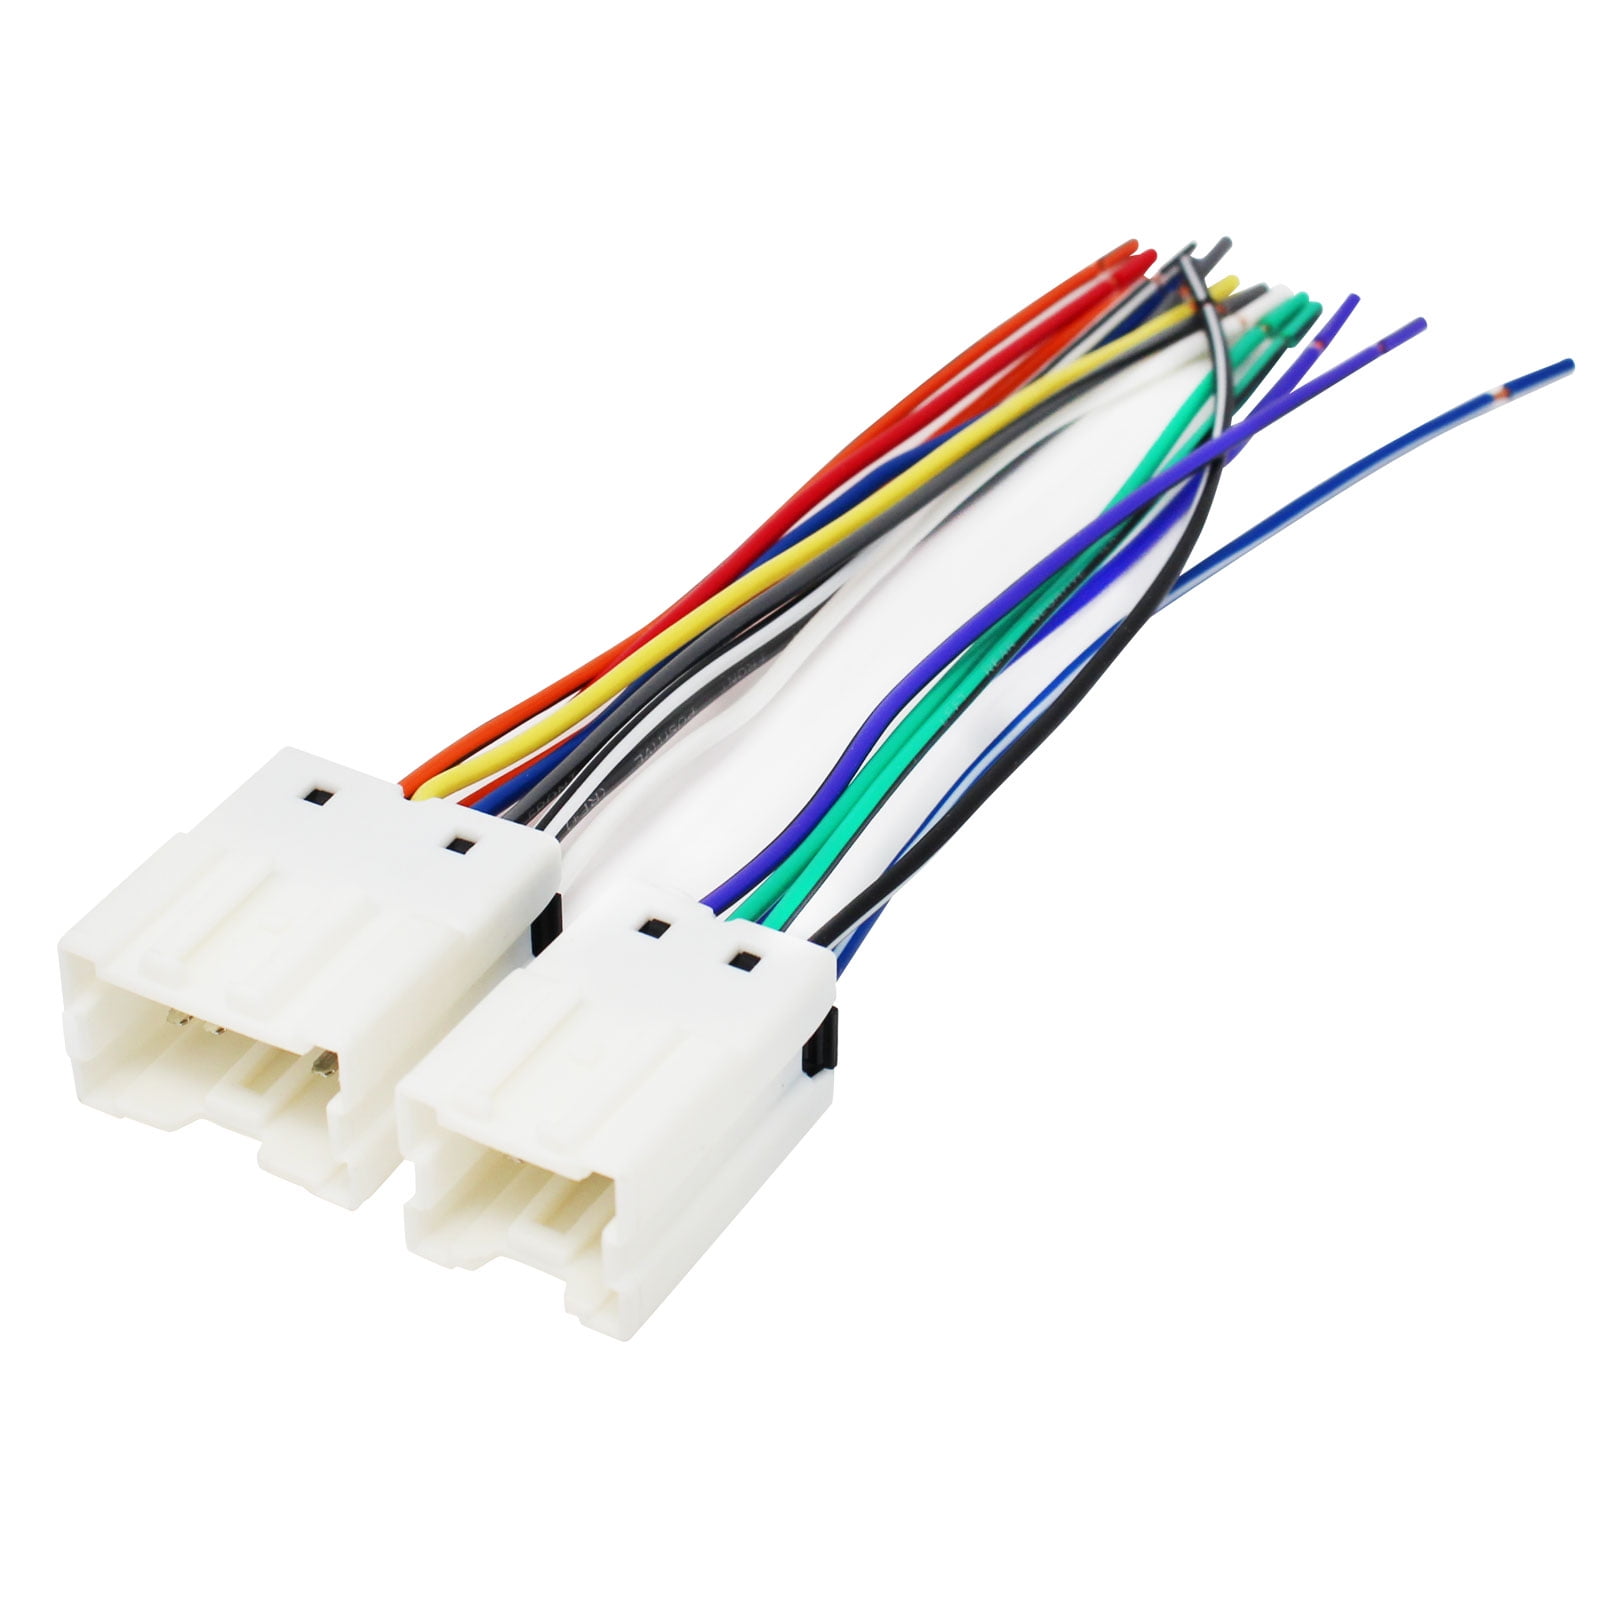 Replacement Radio Wiring Harness For